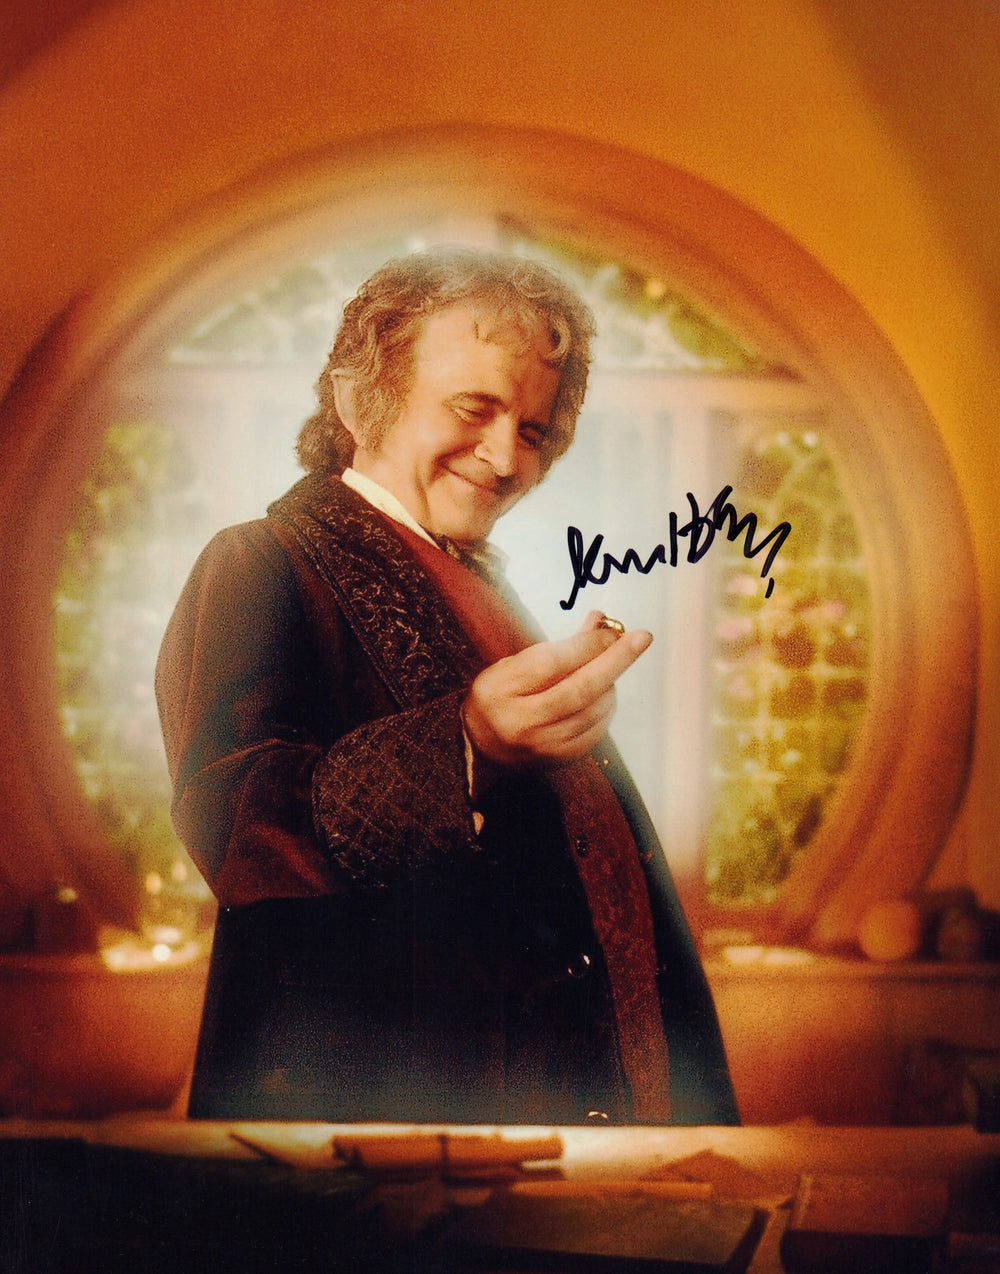 Ian Holm as Bilbo Baggins in The Lord of the Rings: The Fellowship of the Ring Signed 8x10 Photo